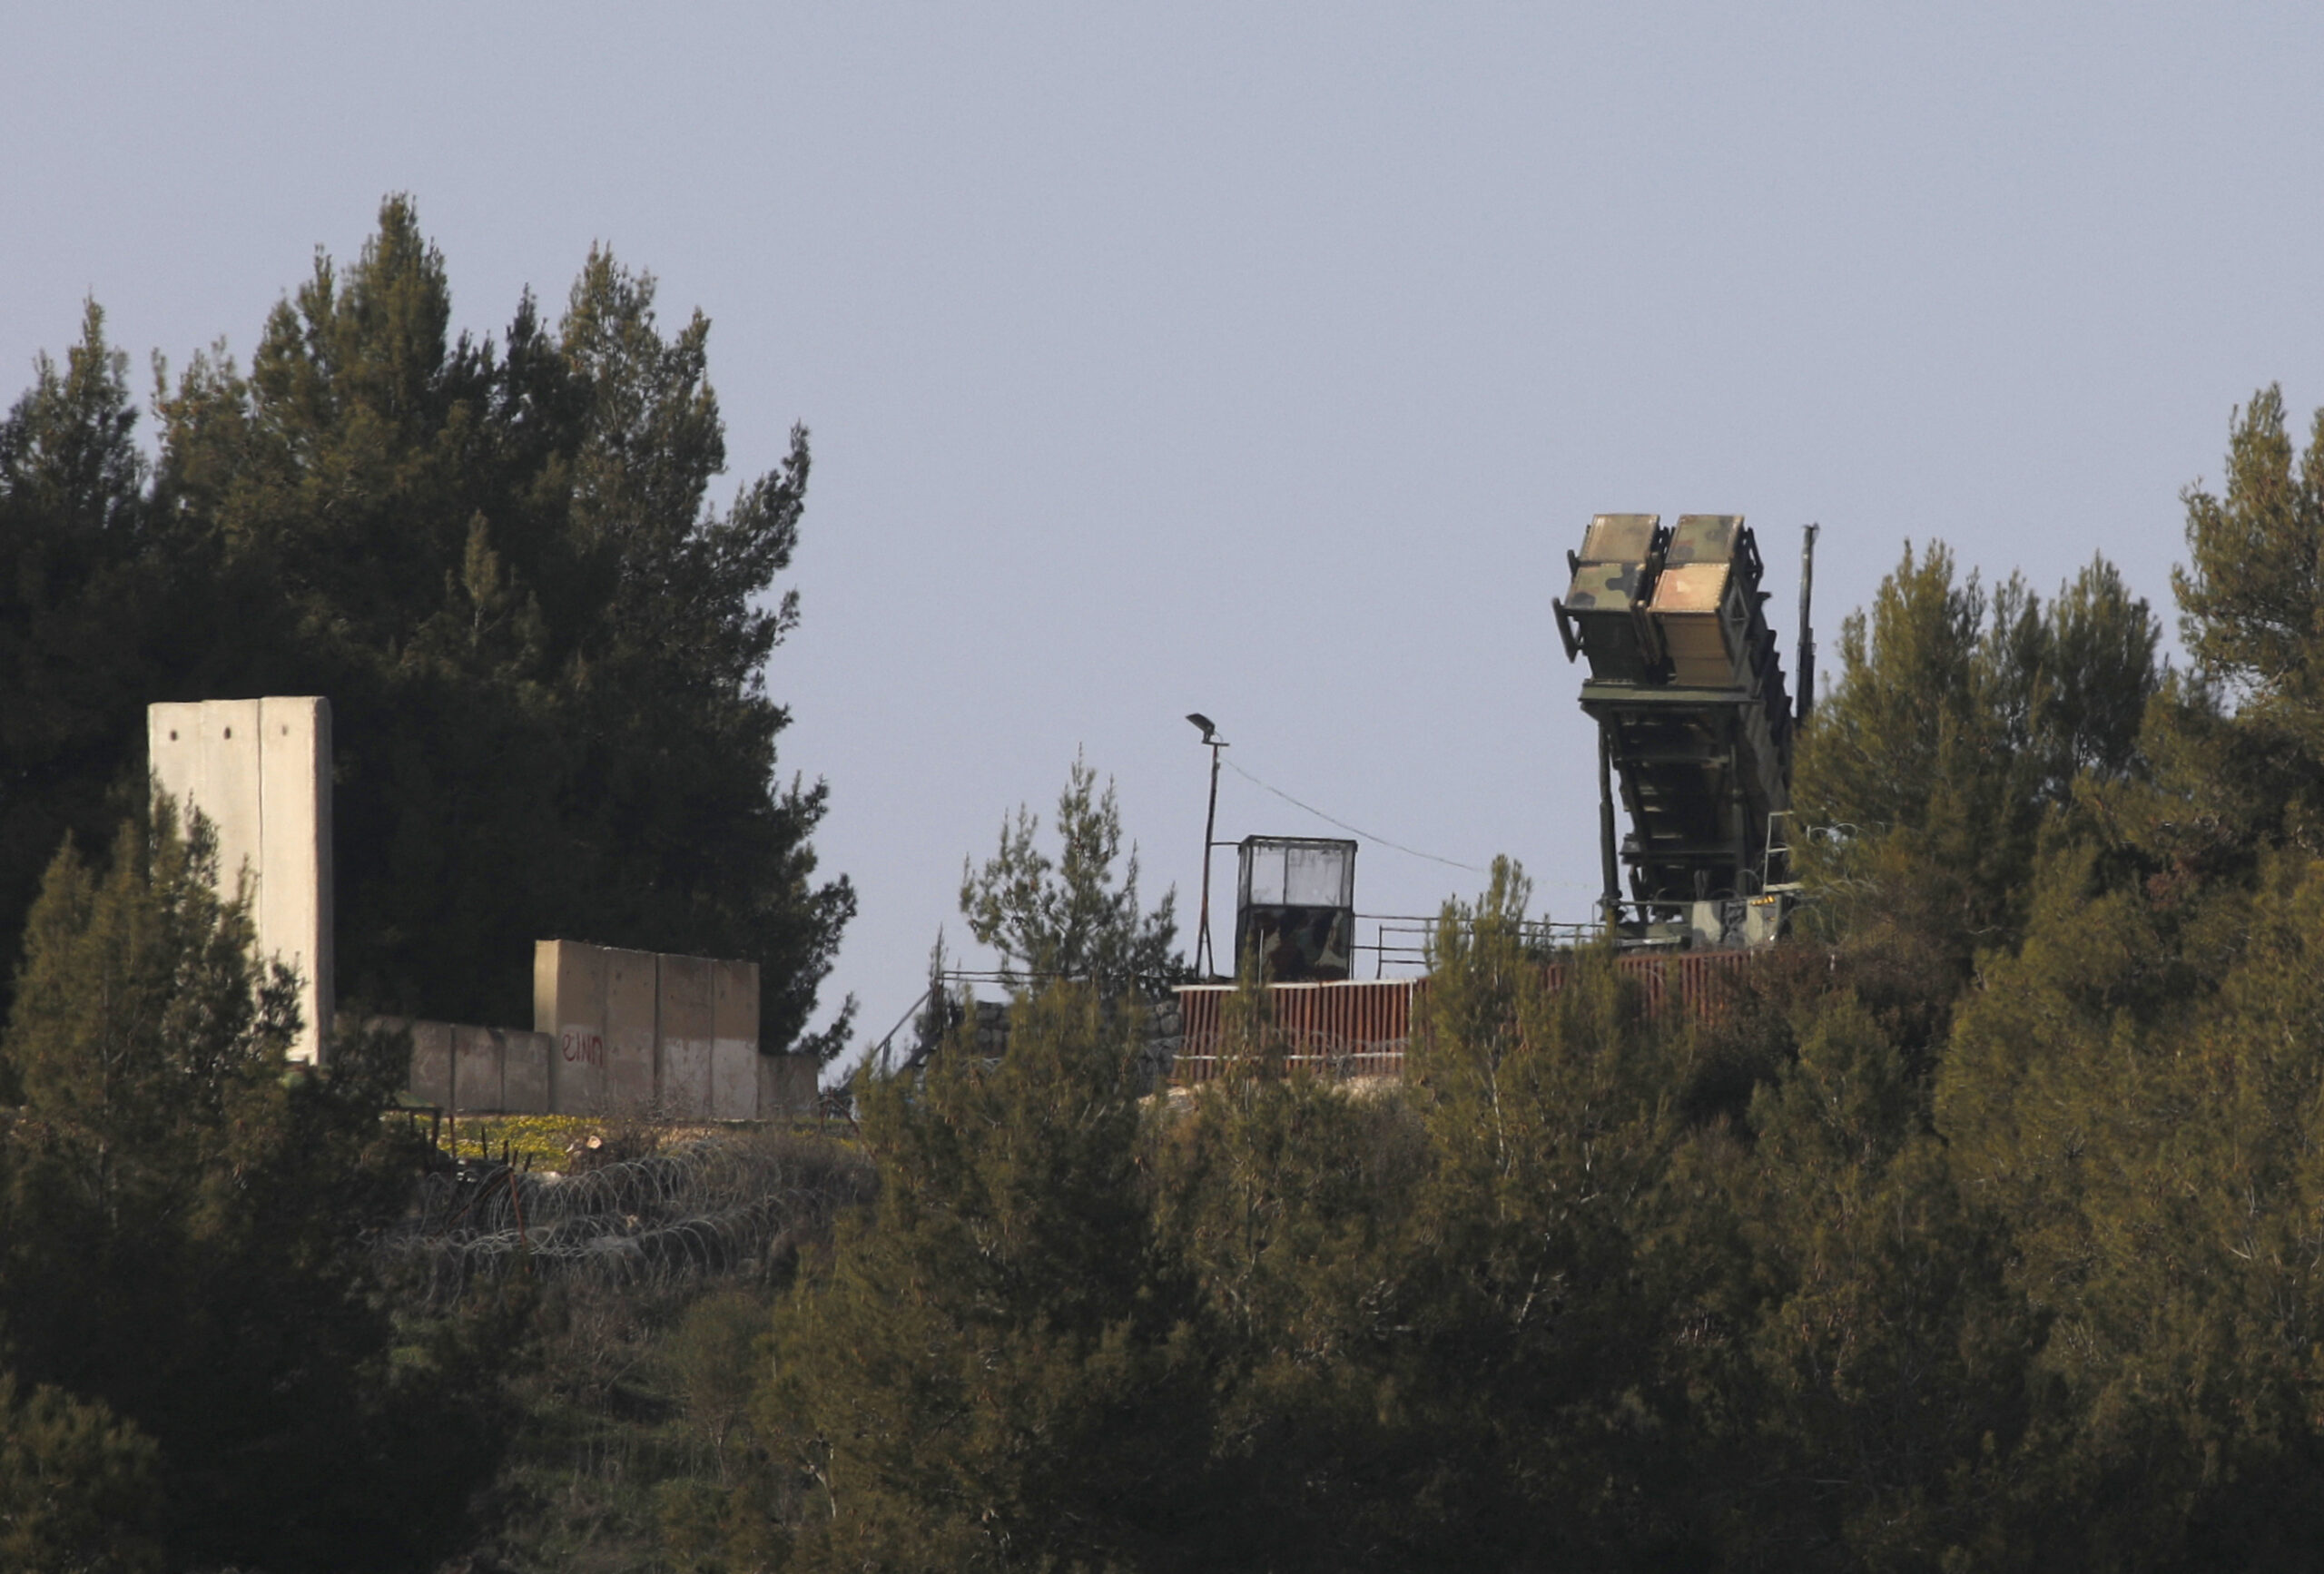 A Patriot surface-to-air missile battery is pictured near the border with Lebanon in northern Israel on February 18, 2022. - Israel's military said its air defences fired at an unmanned aerial vehicle that had crossed into its airspace from Lebanon today, the second such incident in as many days. (Photo by JALAA MAREY / AFP) (Photo by JALAA MAREY/AFP via Getty Images)